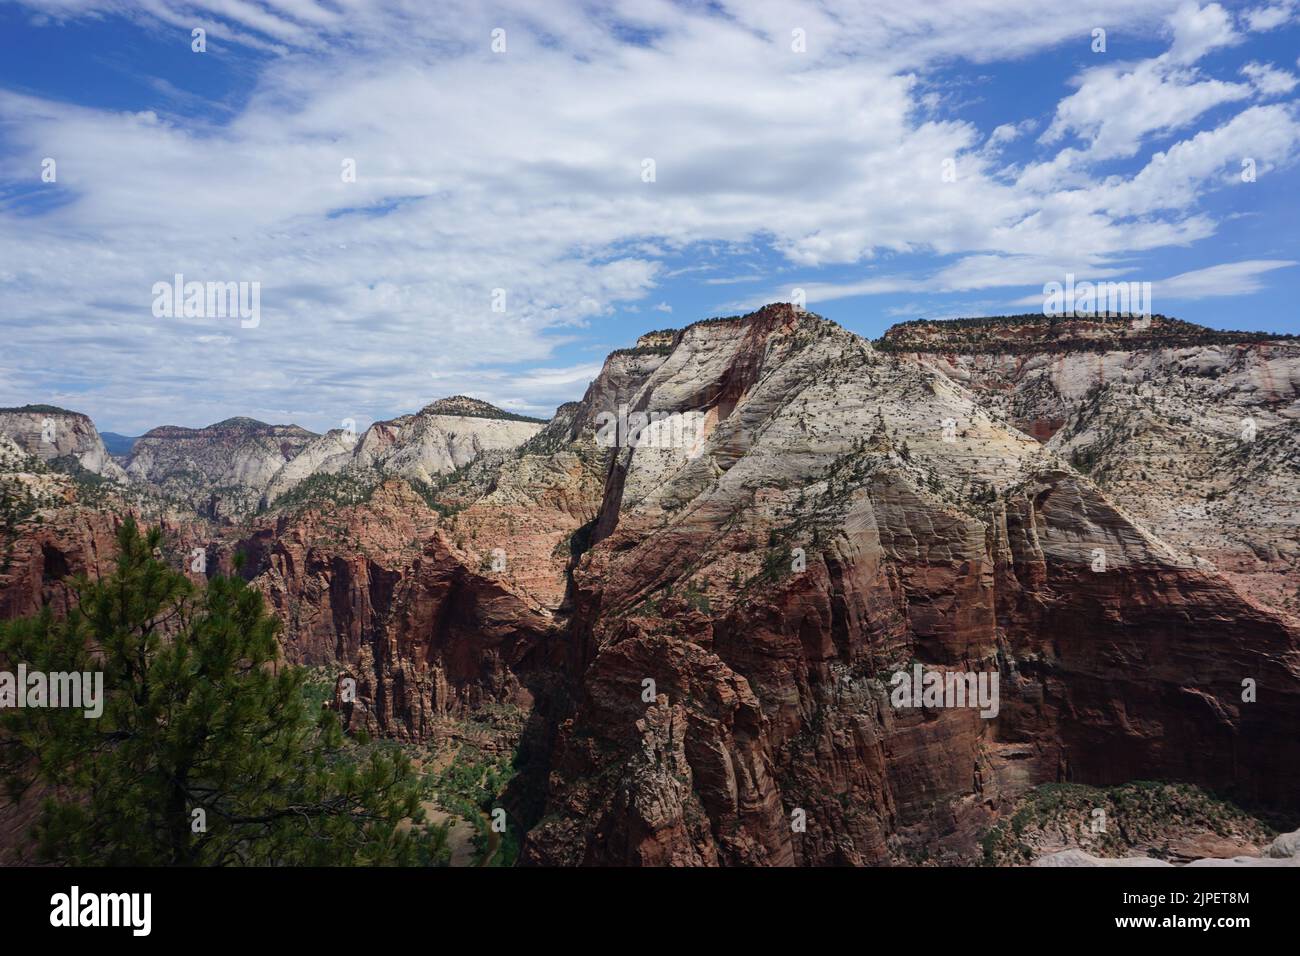 Mountain viewed from Angels Landing, Zion National Park, Utah, United States Stock Photo